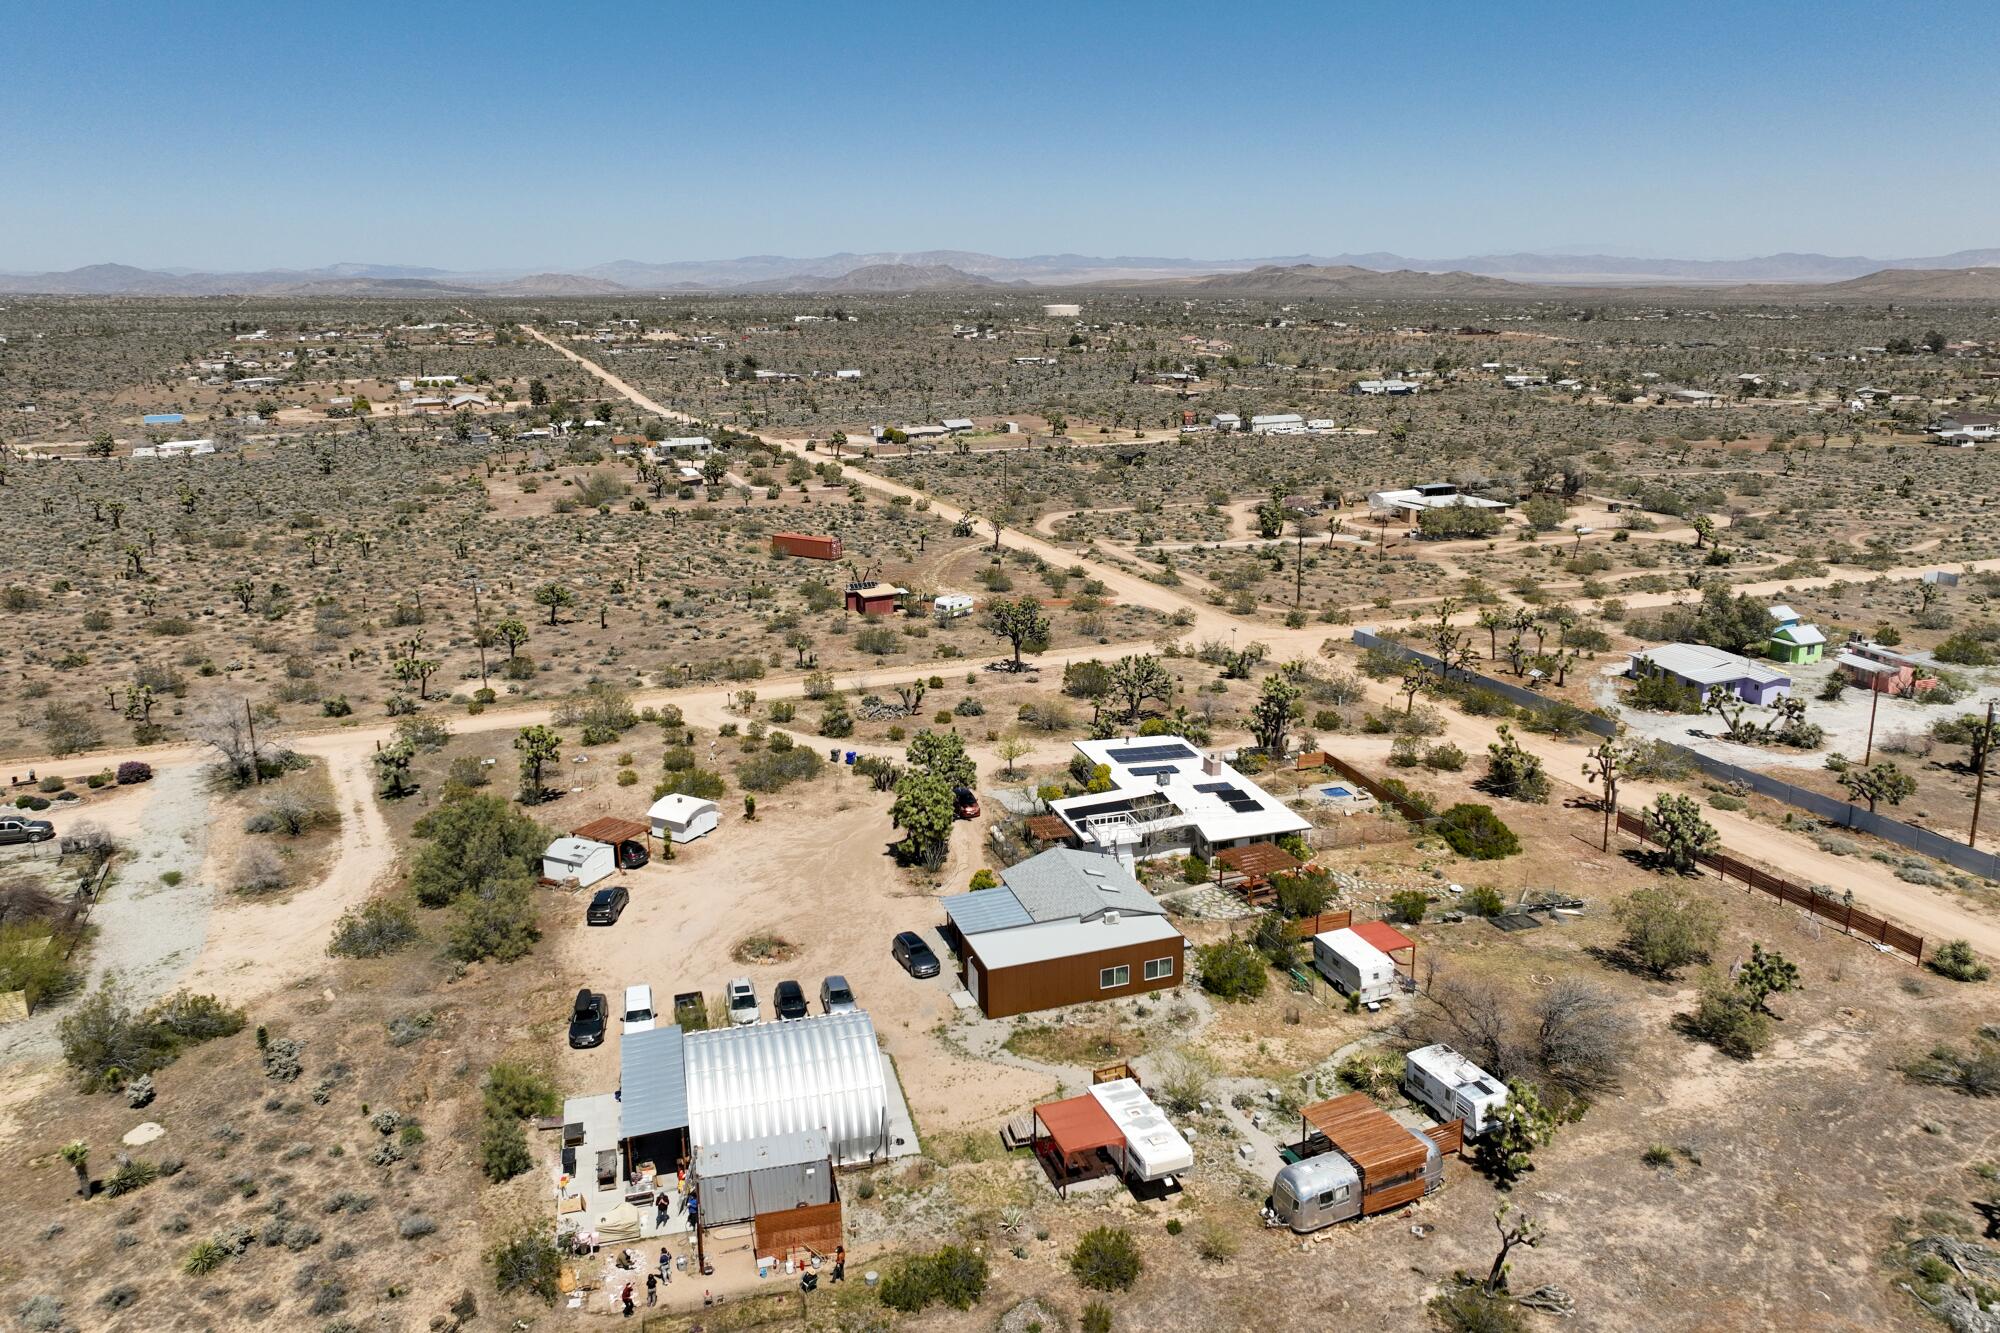 Buildings are spread out over a desert property dotted with bushes and trees.